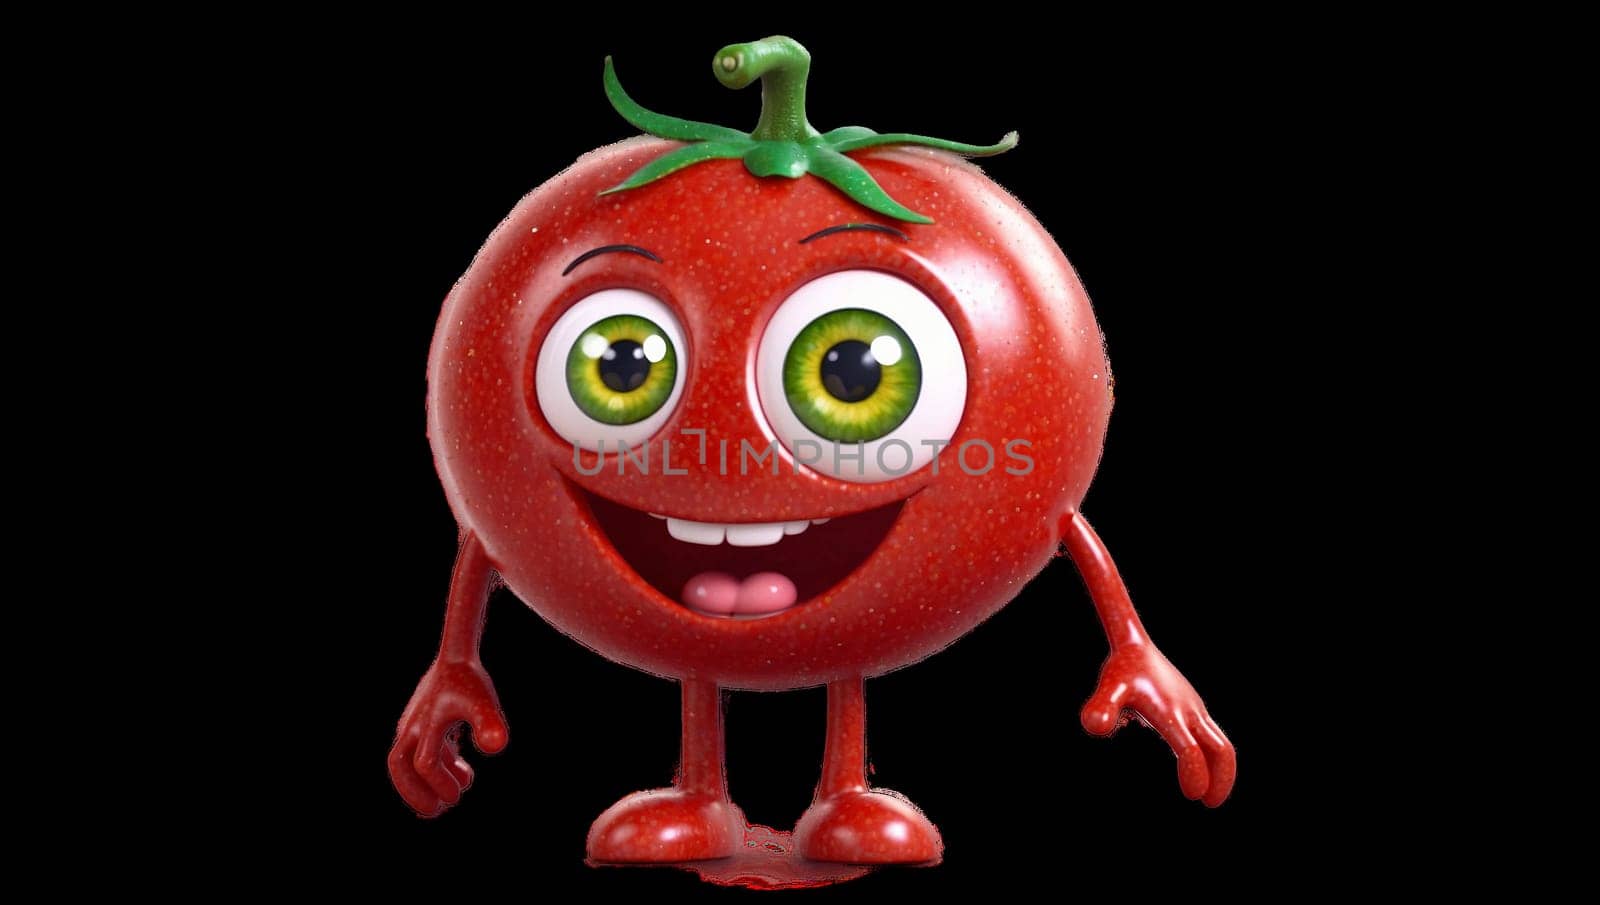 The tomato with human eyes smiles happily by Севостьянов